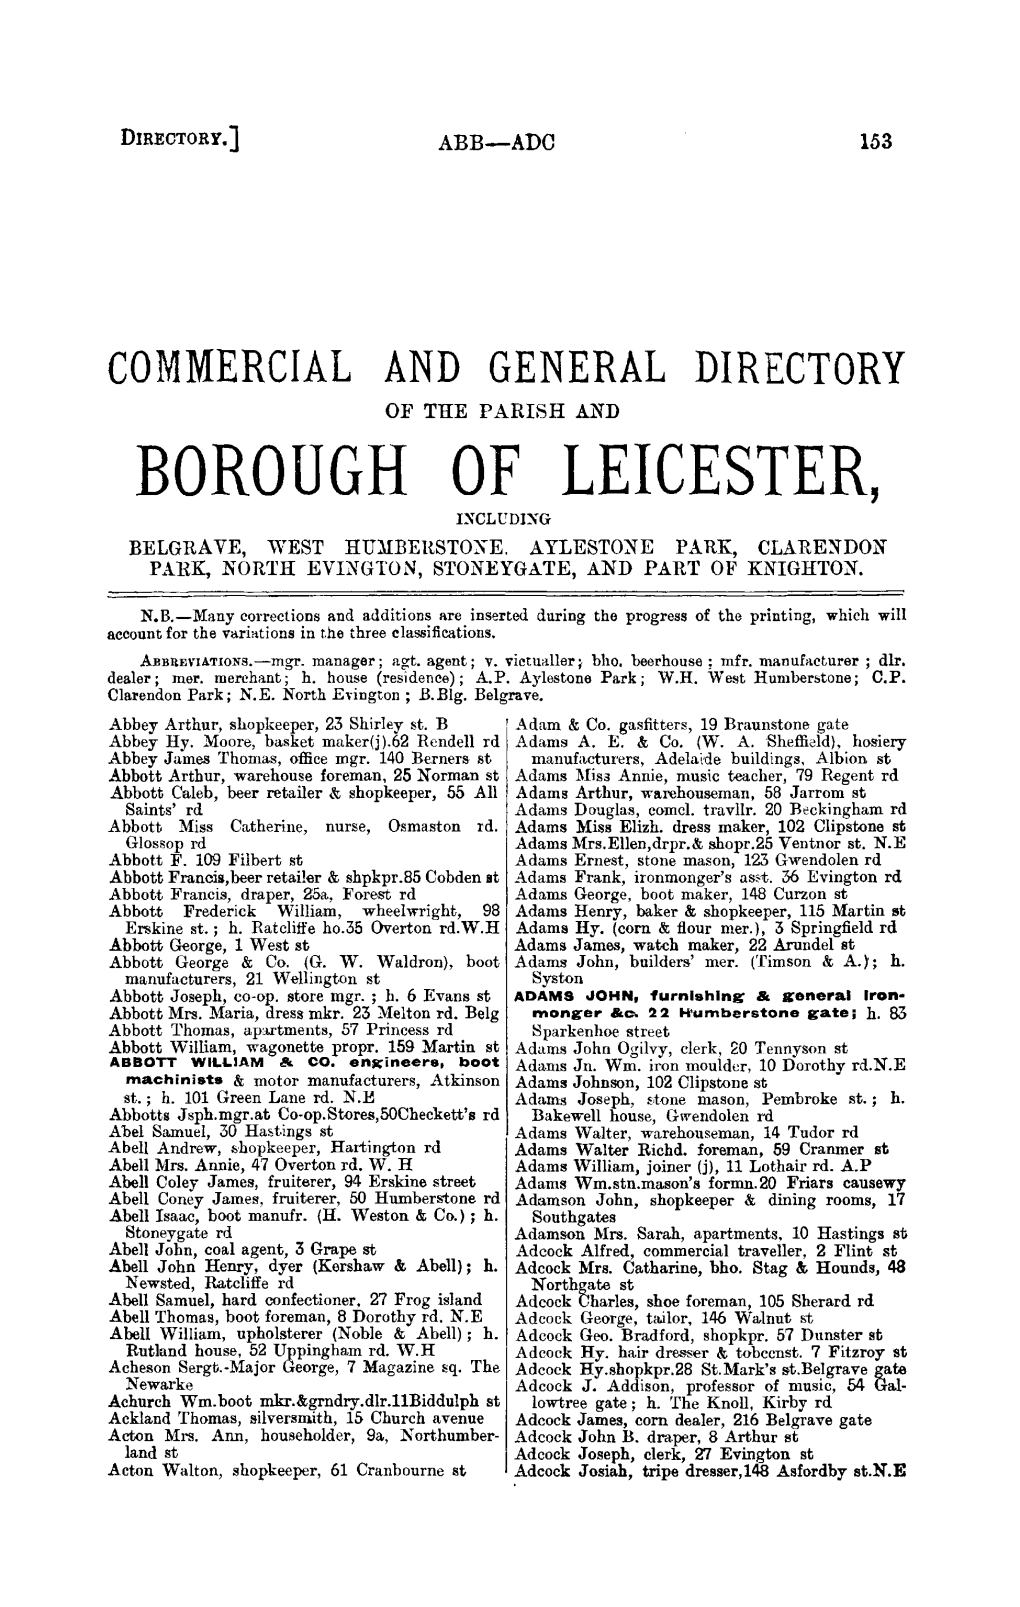 BOROUGH of LEICESTER, Ixclvdlxg BELGRAVE, WEST HUMBERSTOXE